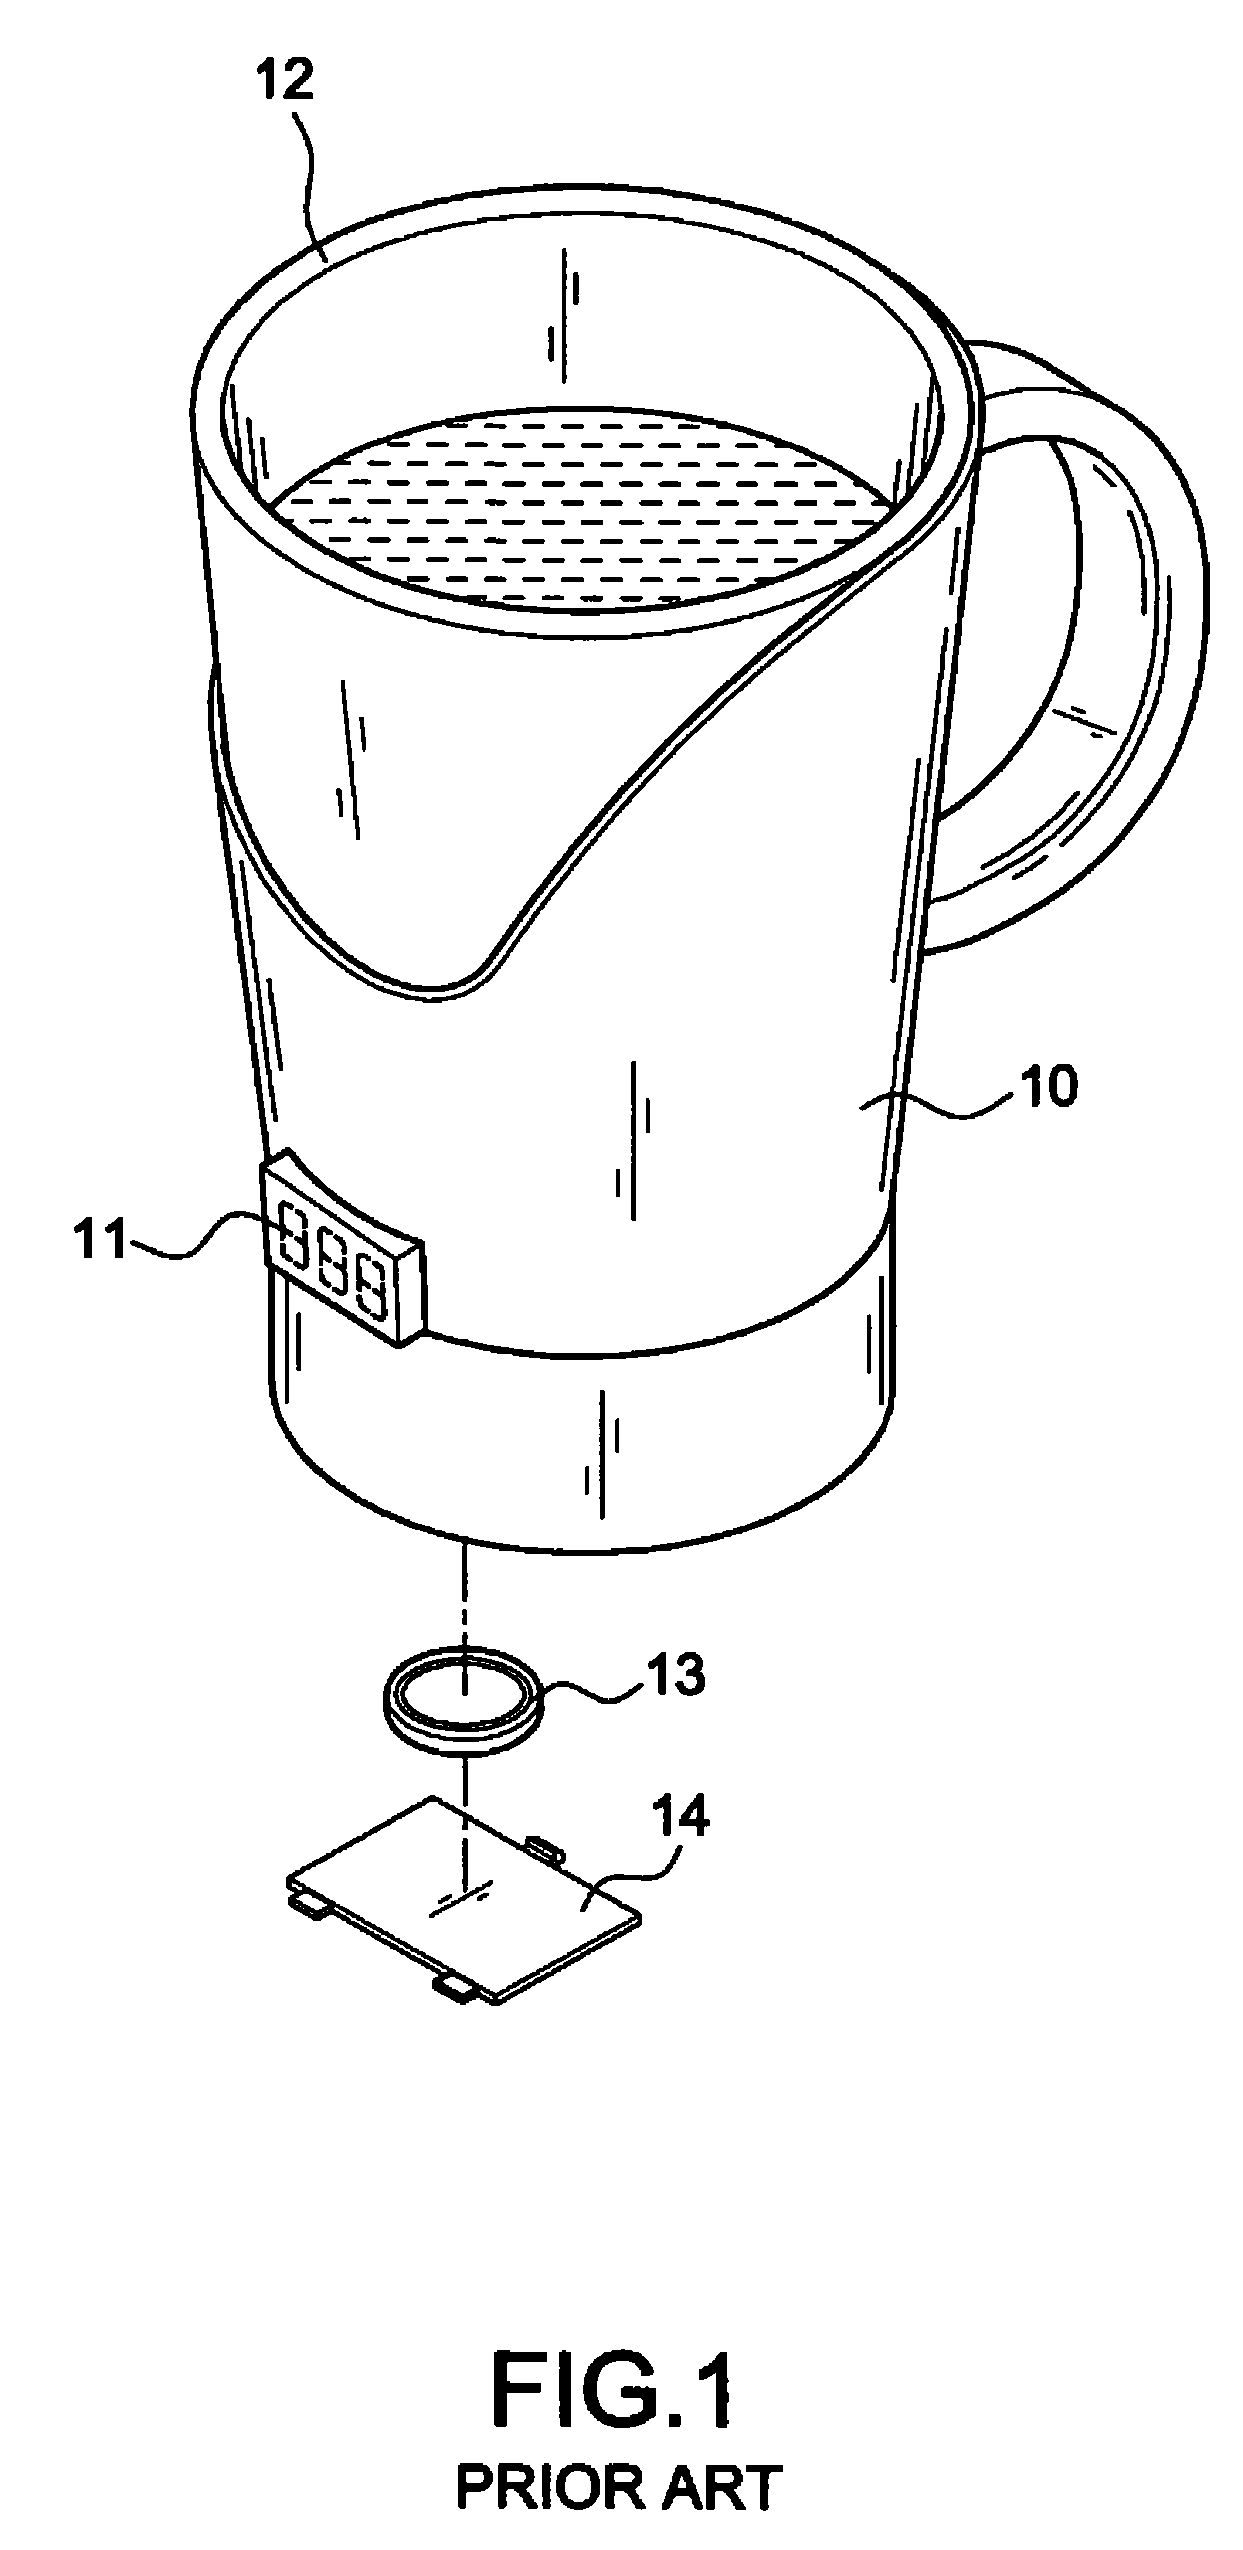 Liquid container capable of self-generating power and showing temprature